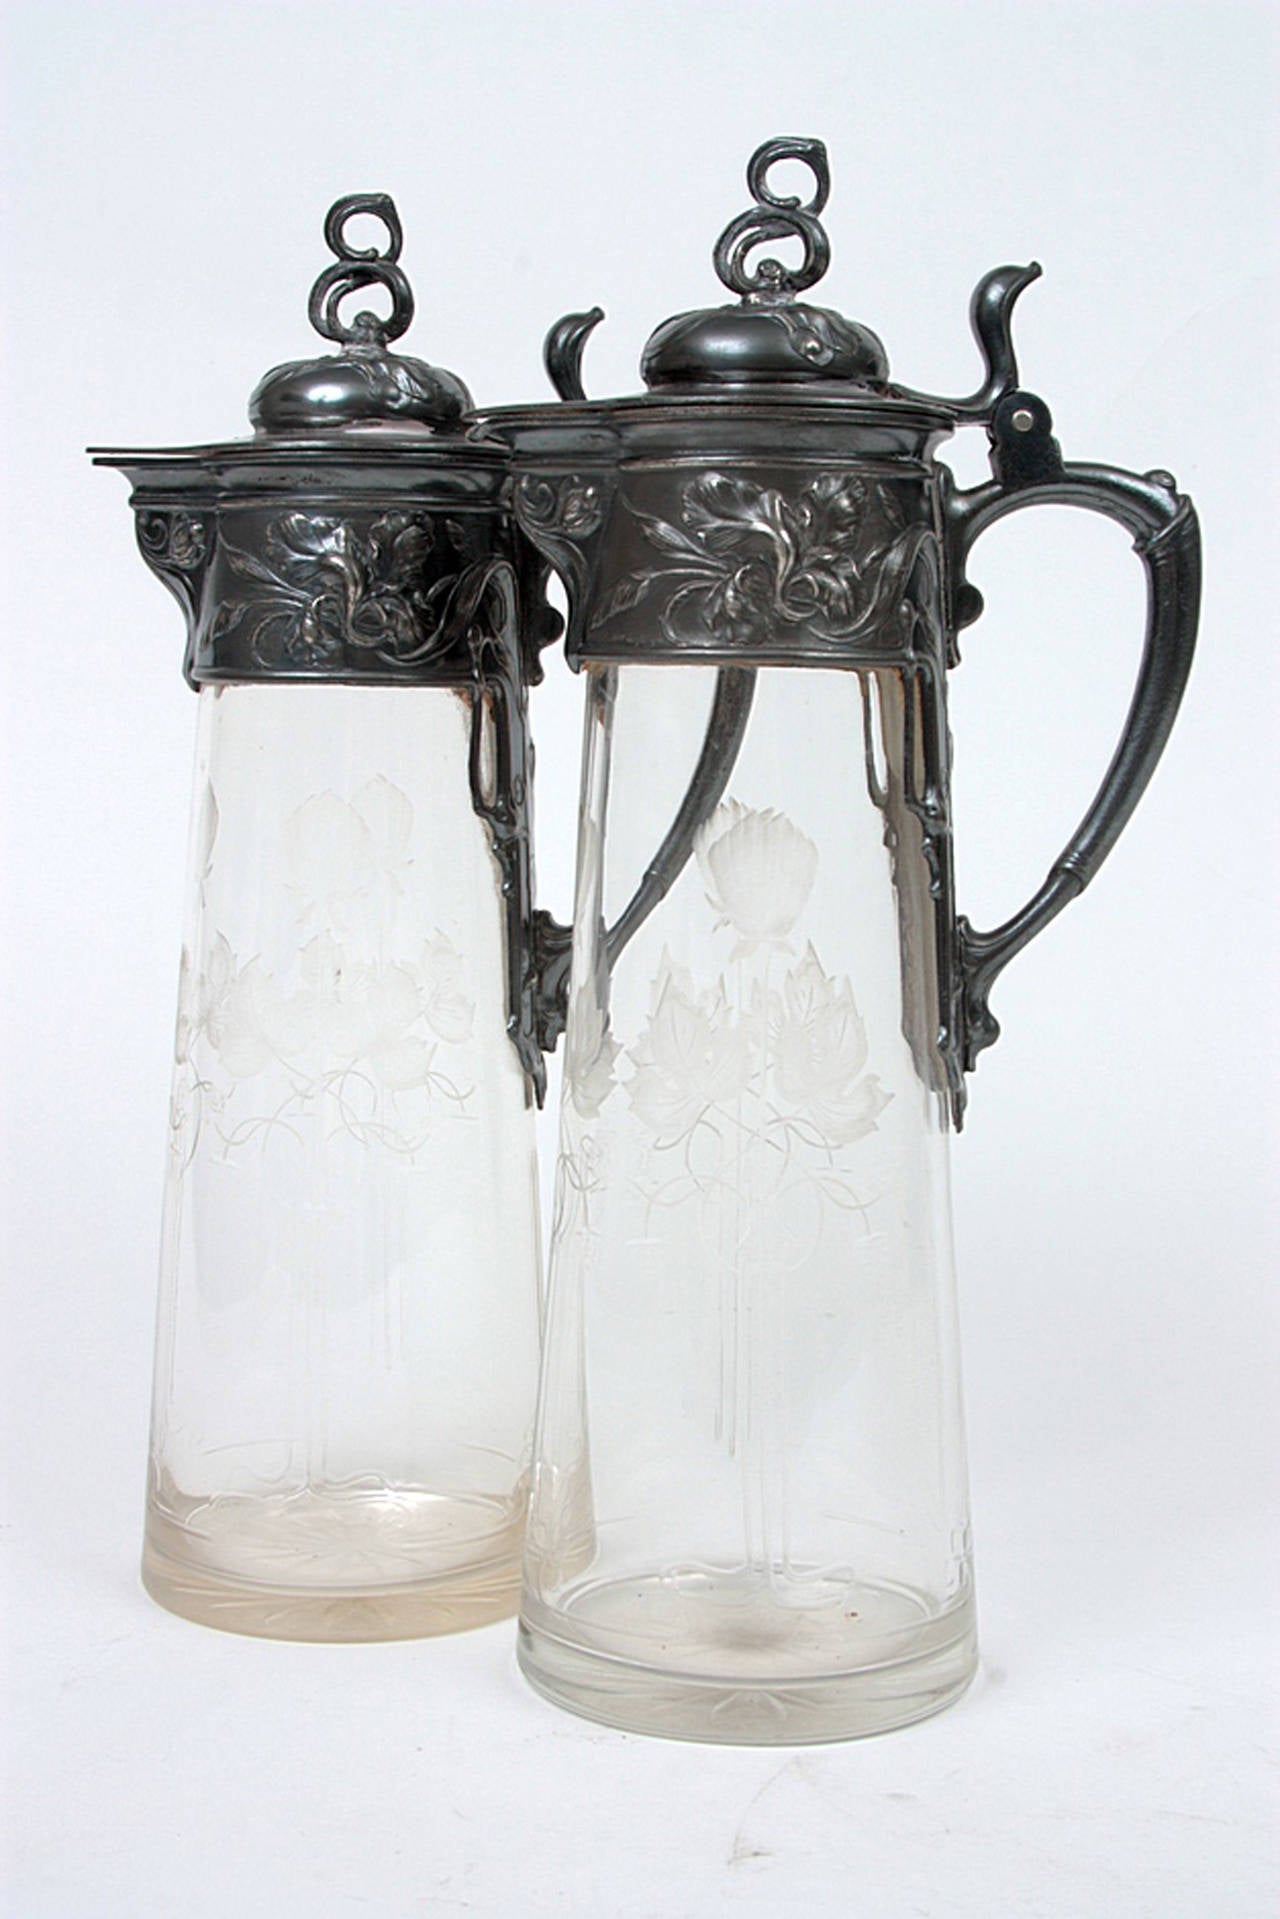 Pair of Art Nouveau WMF carafes or Pitchers 
Germany about 1900 - 1910

Thick glass, polished and engraved.
High: 33cm (12.64in)